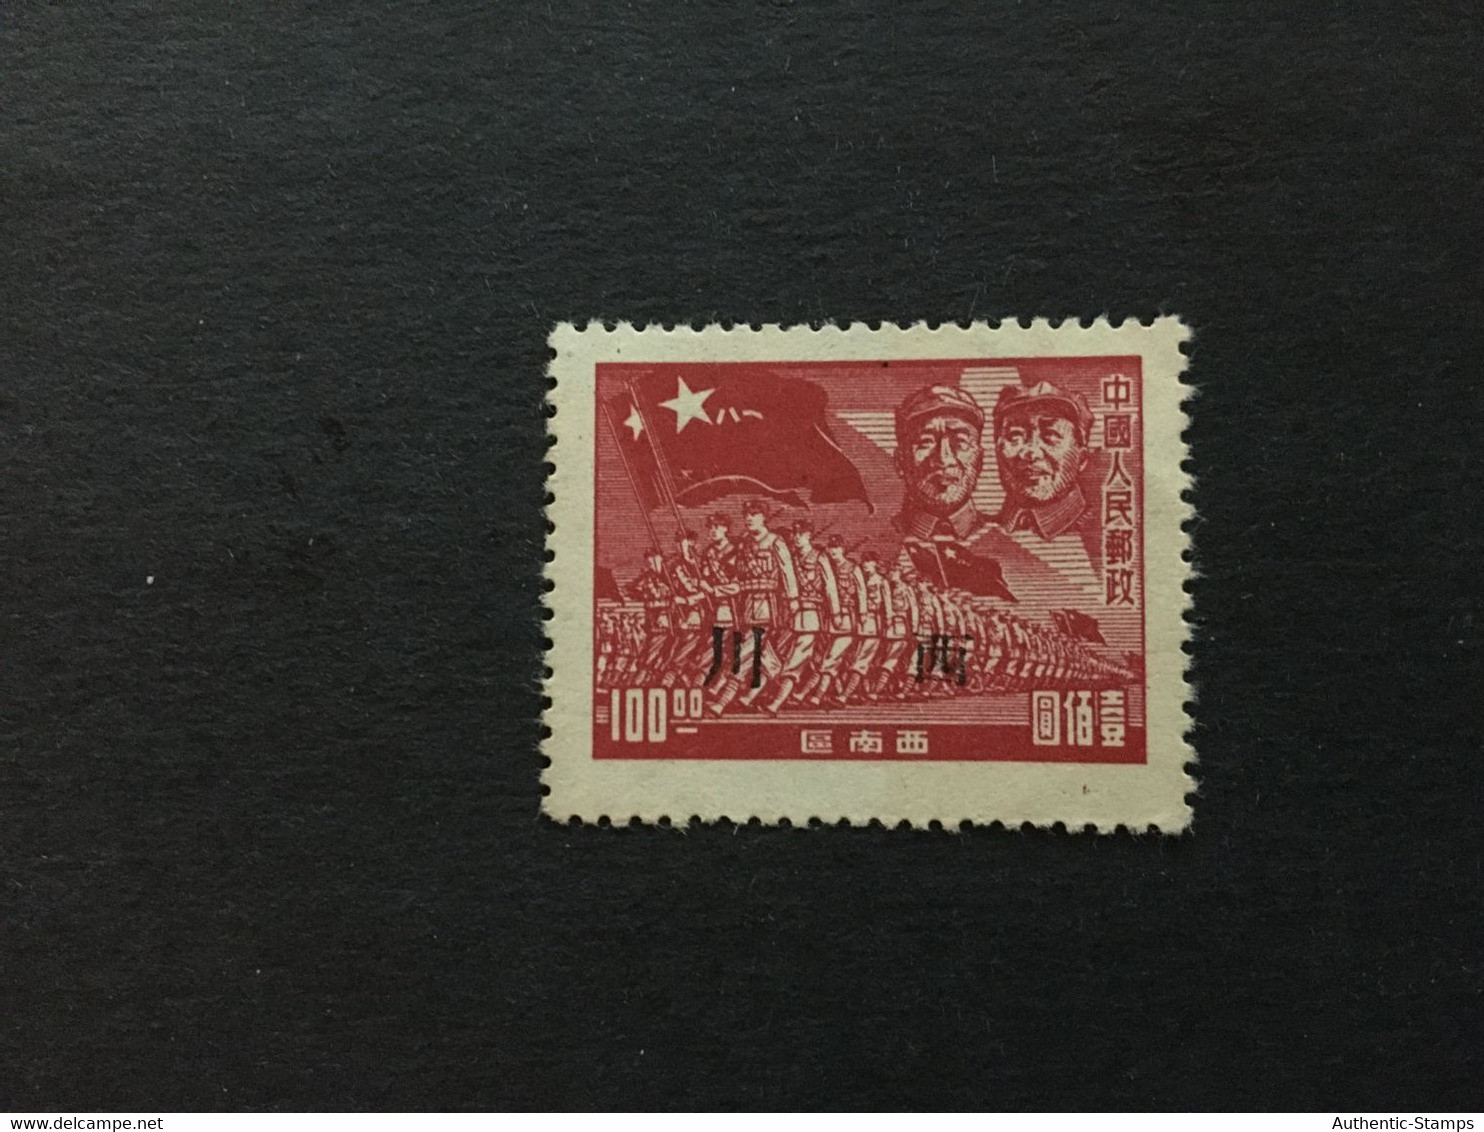 1950  CHINA  STAMP, Rare Overprint, Western Sichuan, TIMBRO, STEMPEL, UnUSED, CINA, CHINE, LIST 2957 - Chine Du Sud-Ouest 1949-50